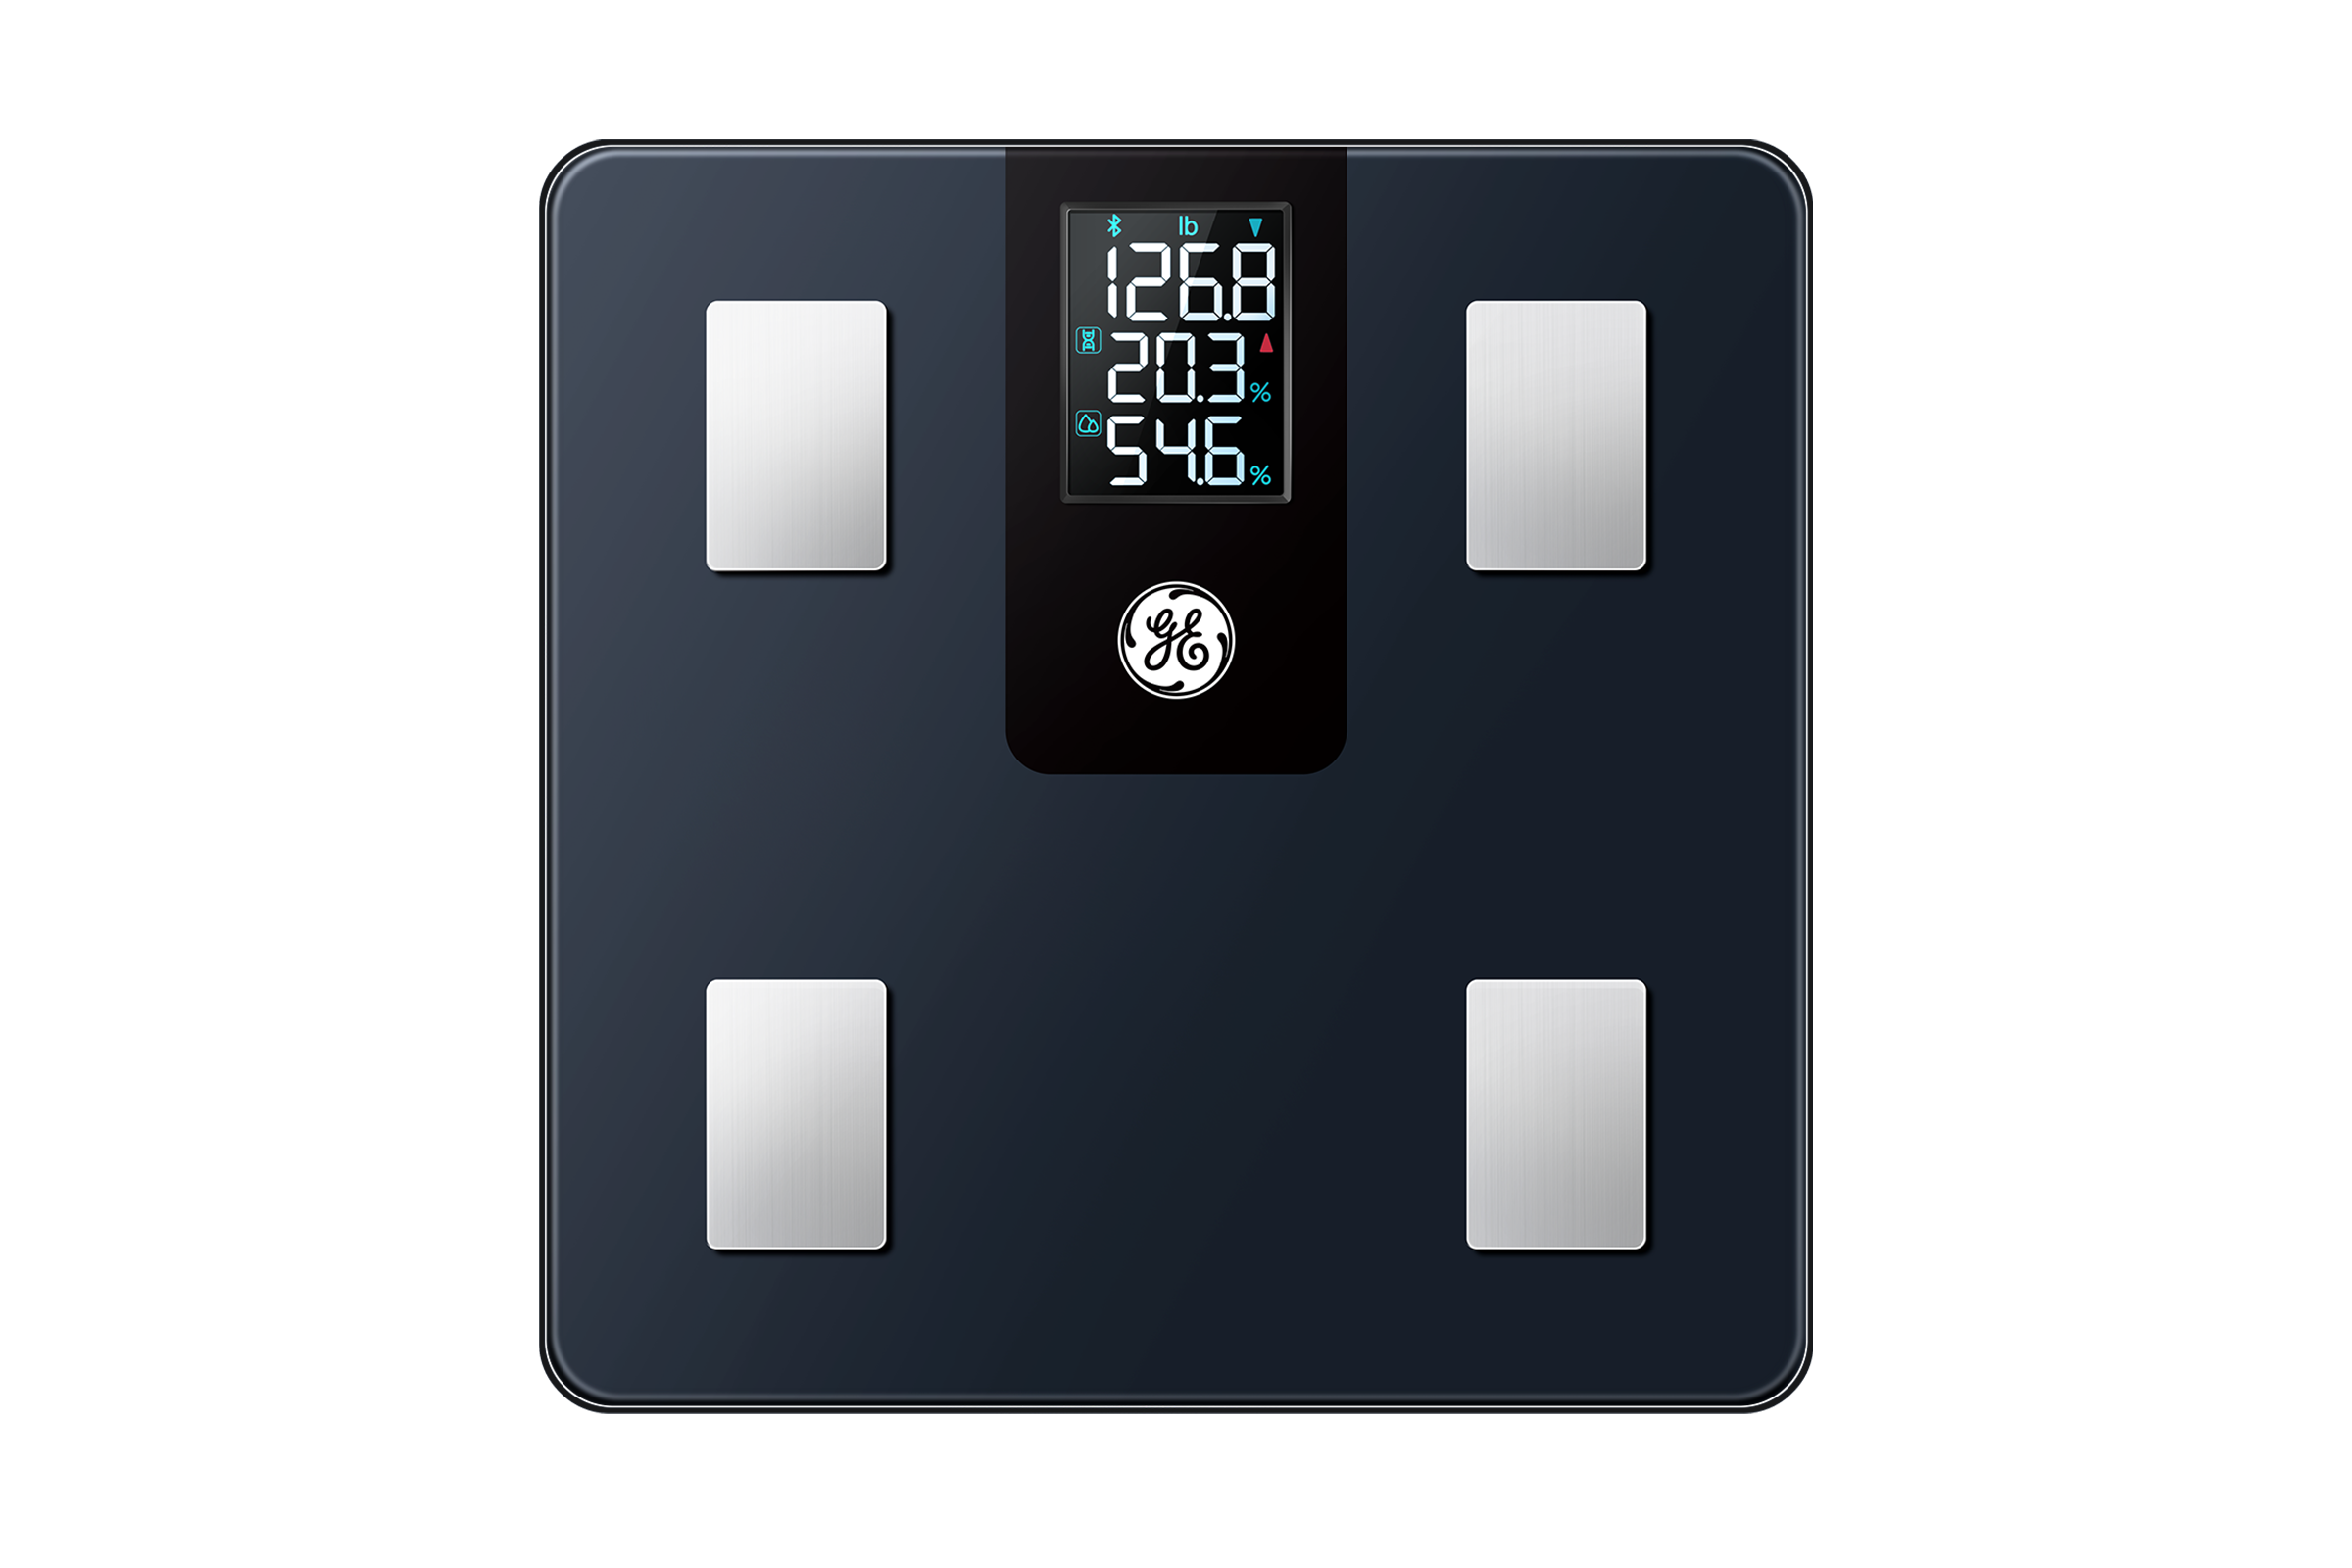 GE Smart Scale: GE Fit Plus Body Fat Scale the latest in GE Fit series